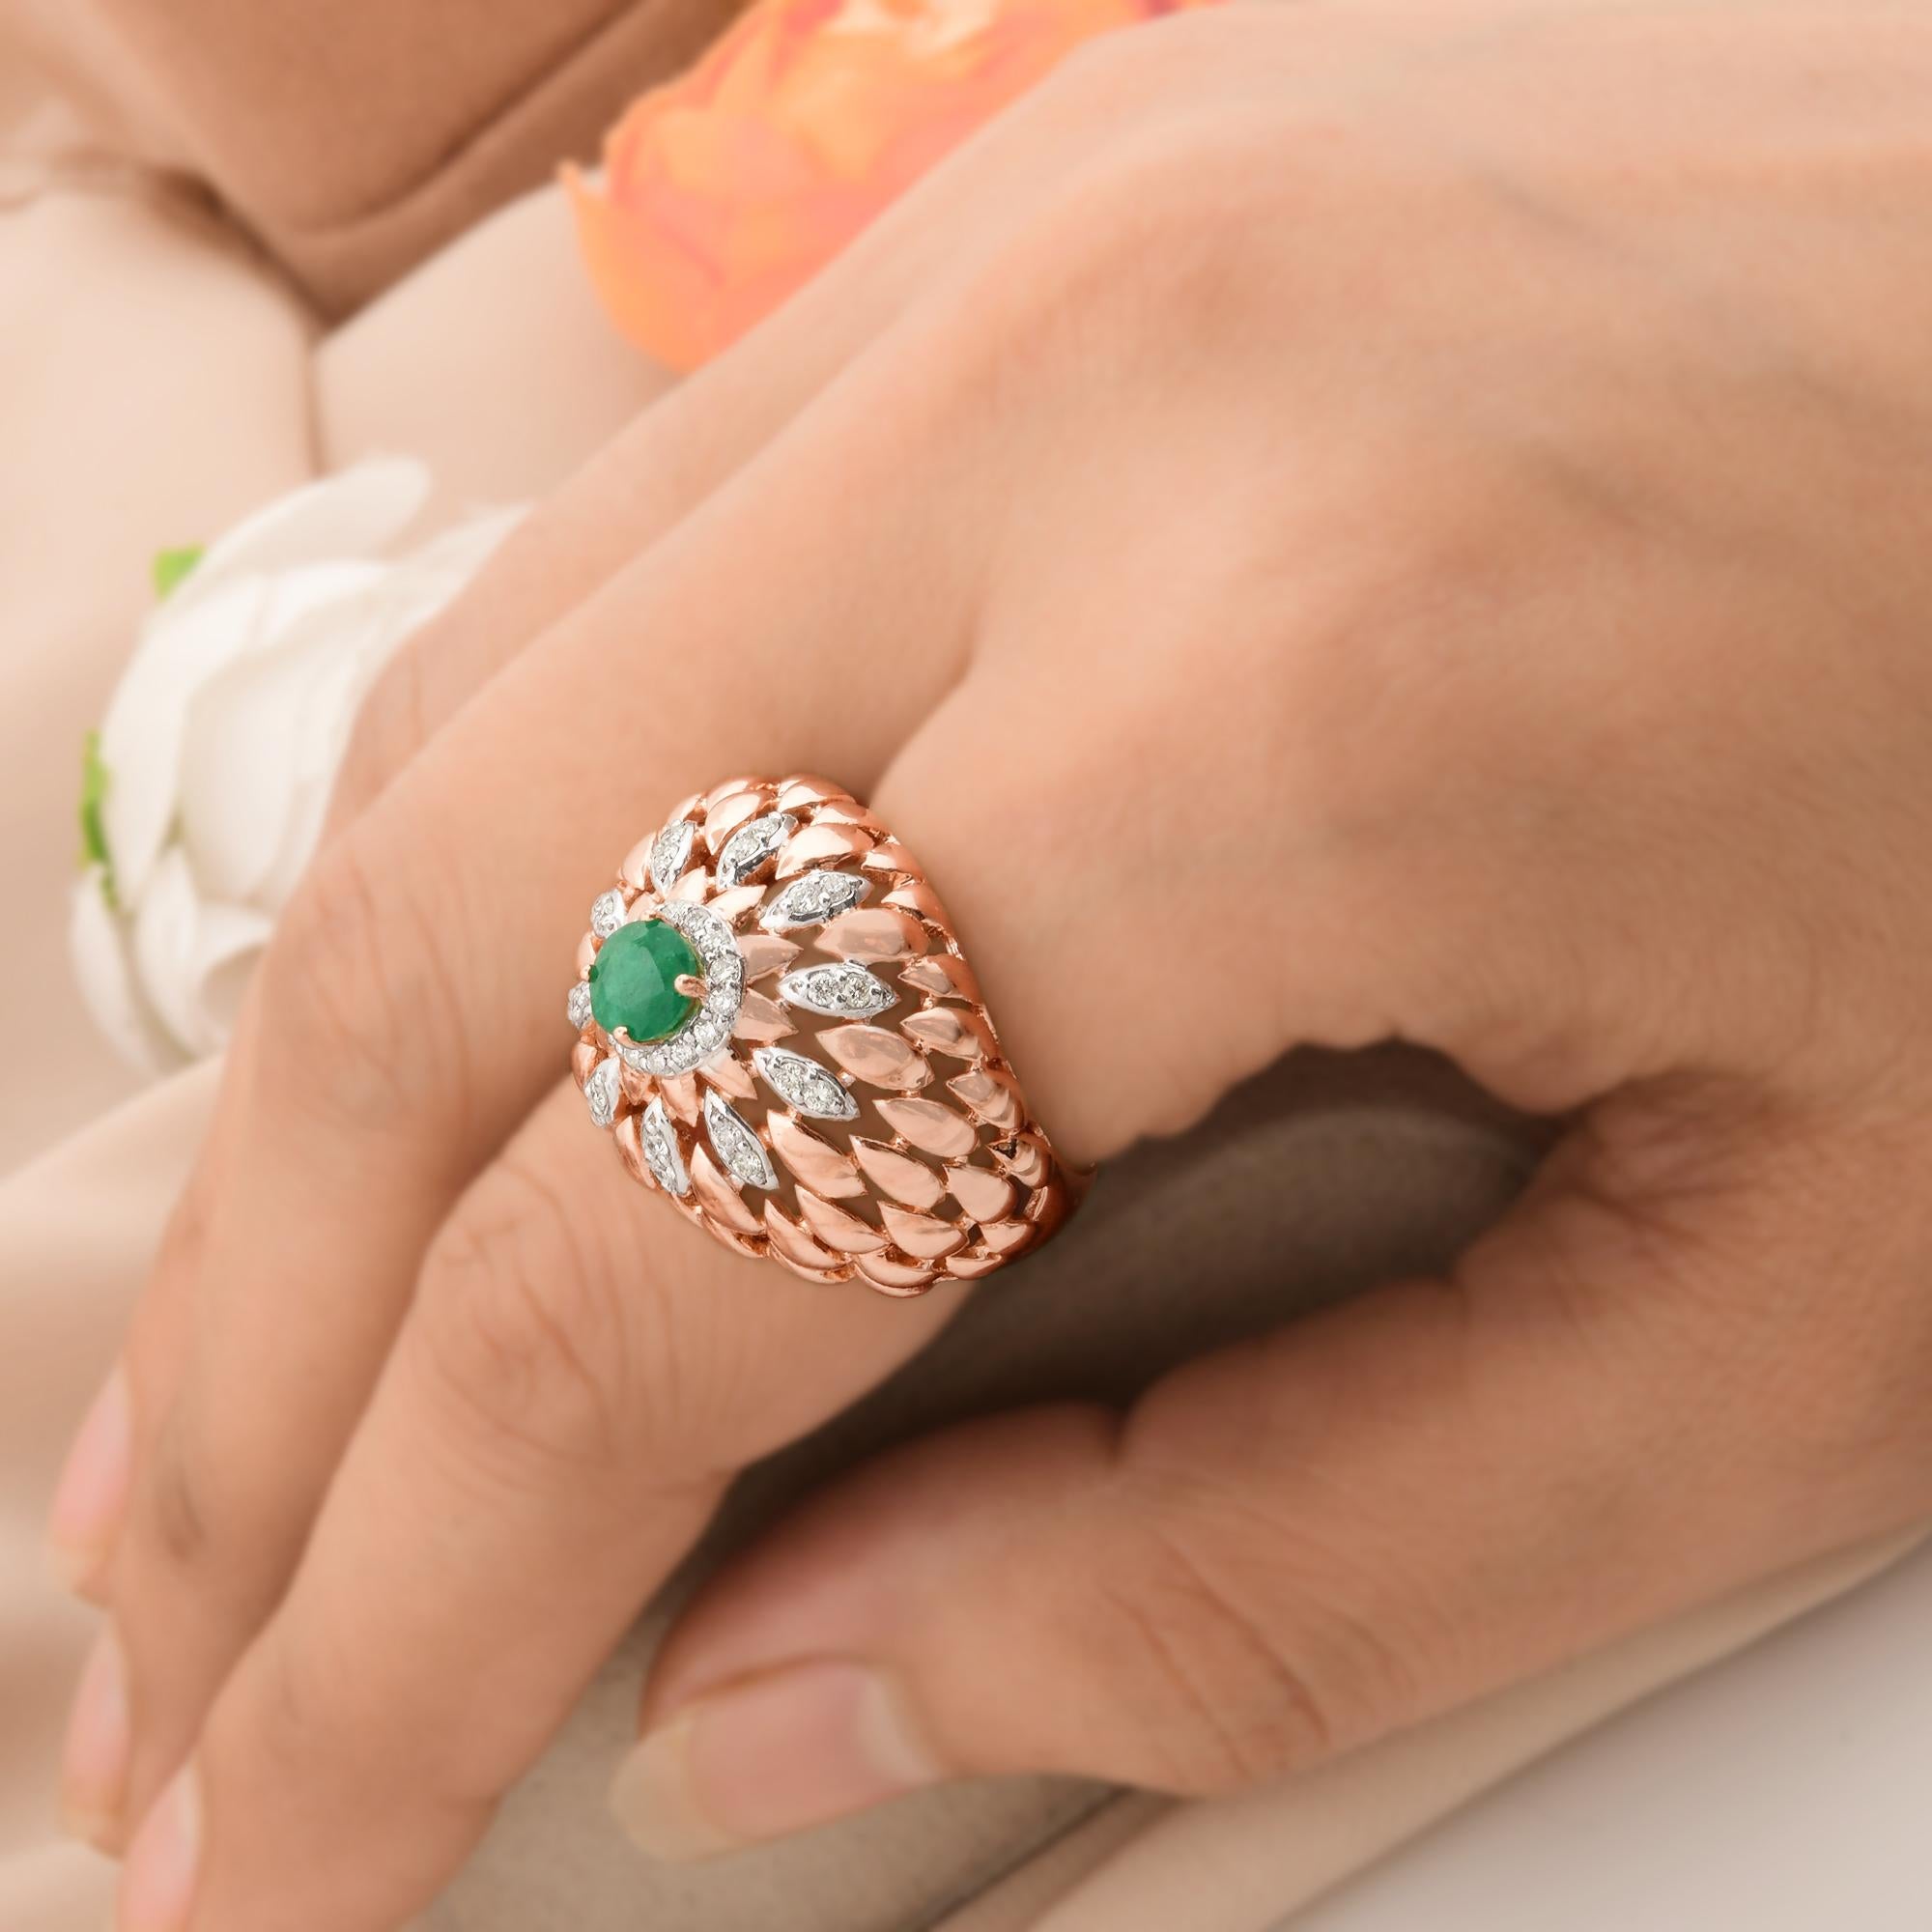 For Sale:  Natural Emerald Gemstone Dome Ring Diamond Pave Solid 18k Rose Gold Fine Jewelry 5